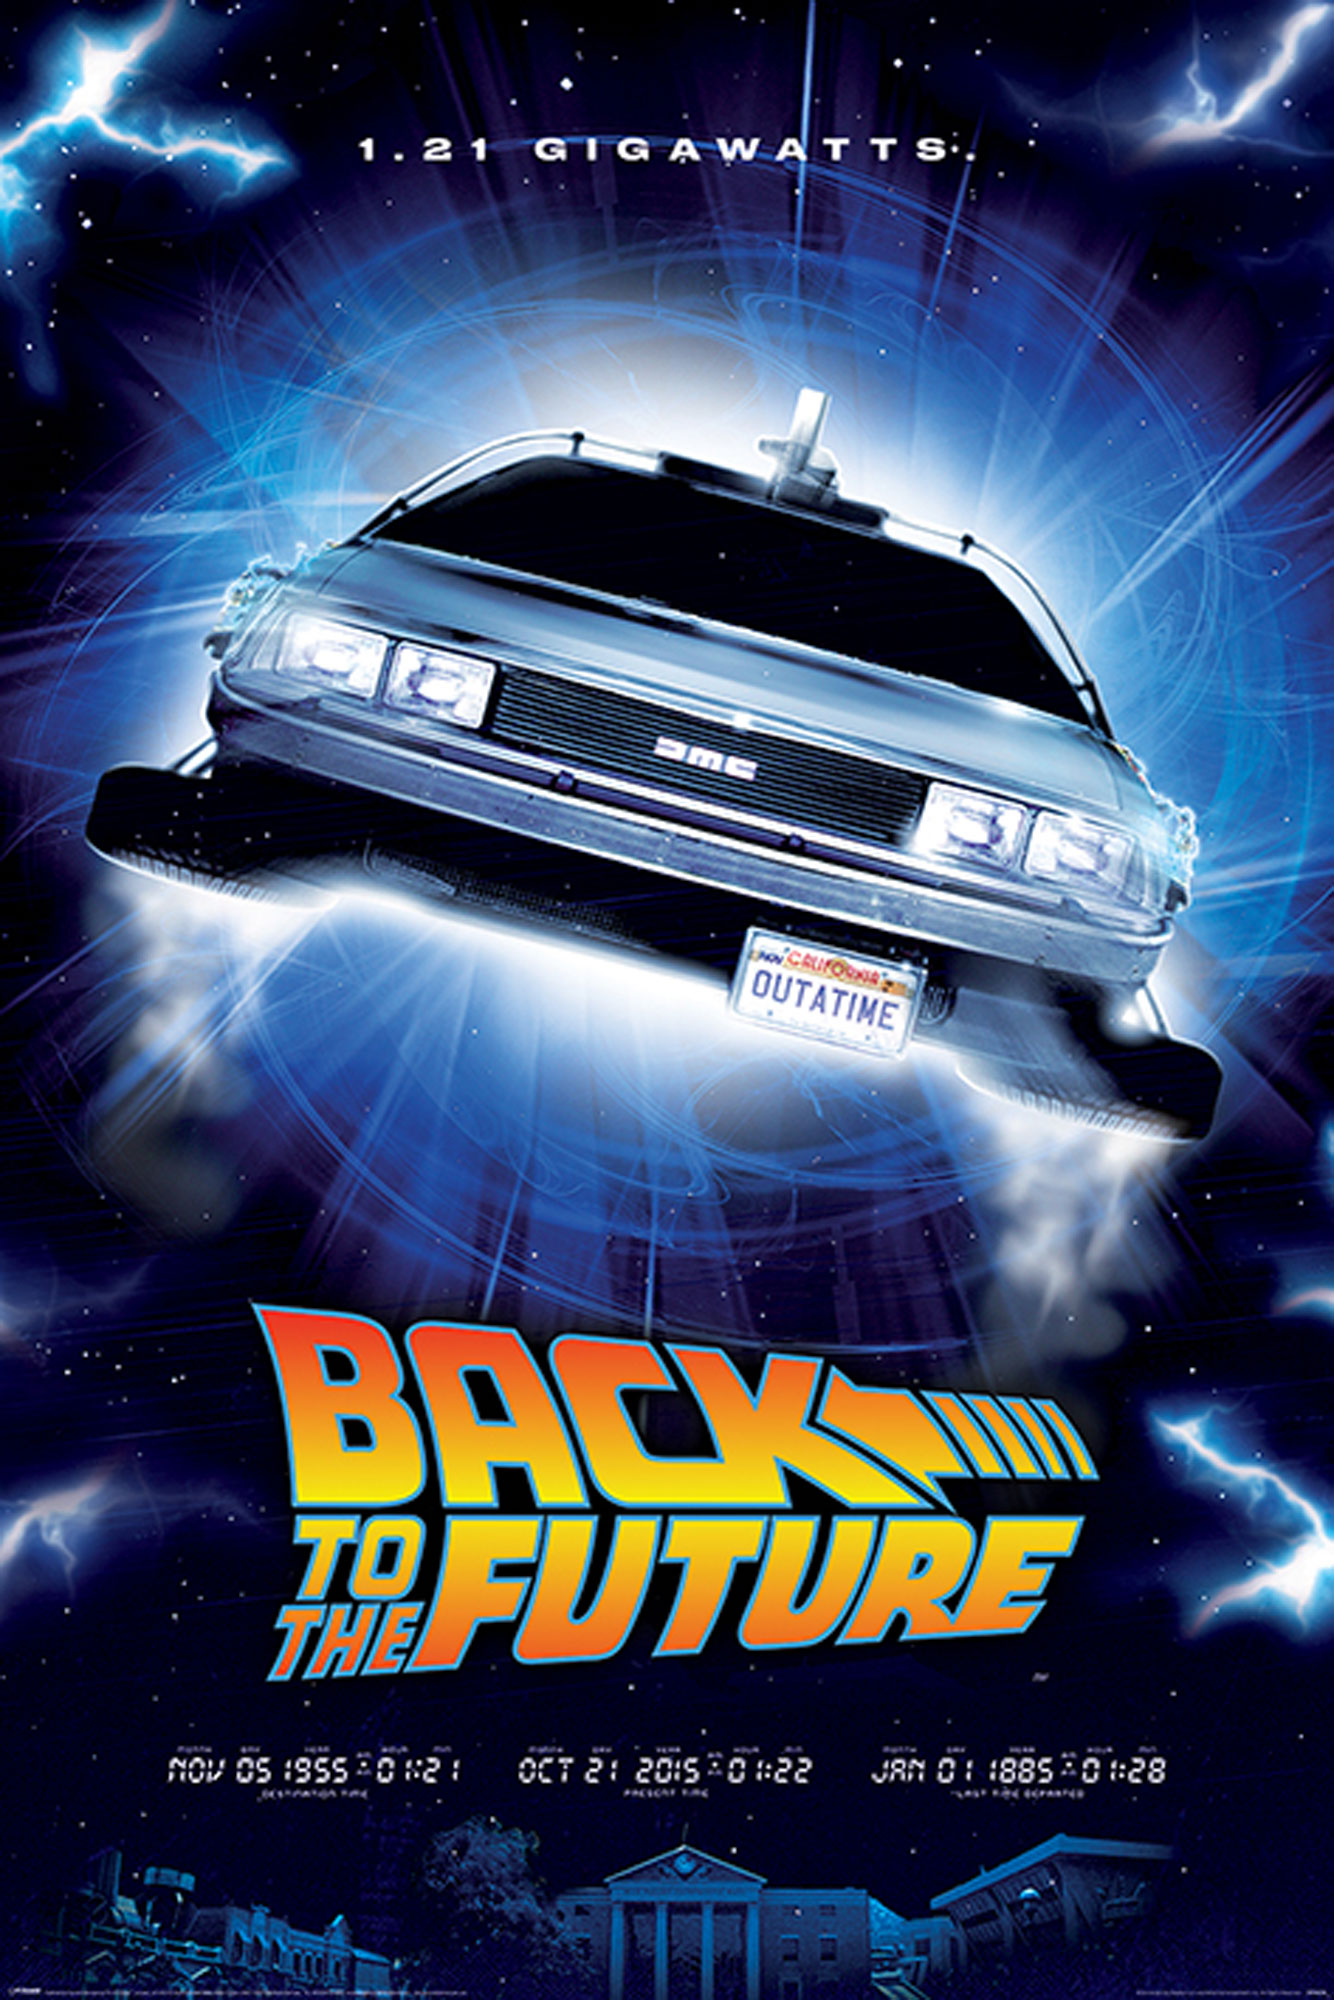 The Future To - Gigawatts Back 1.21